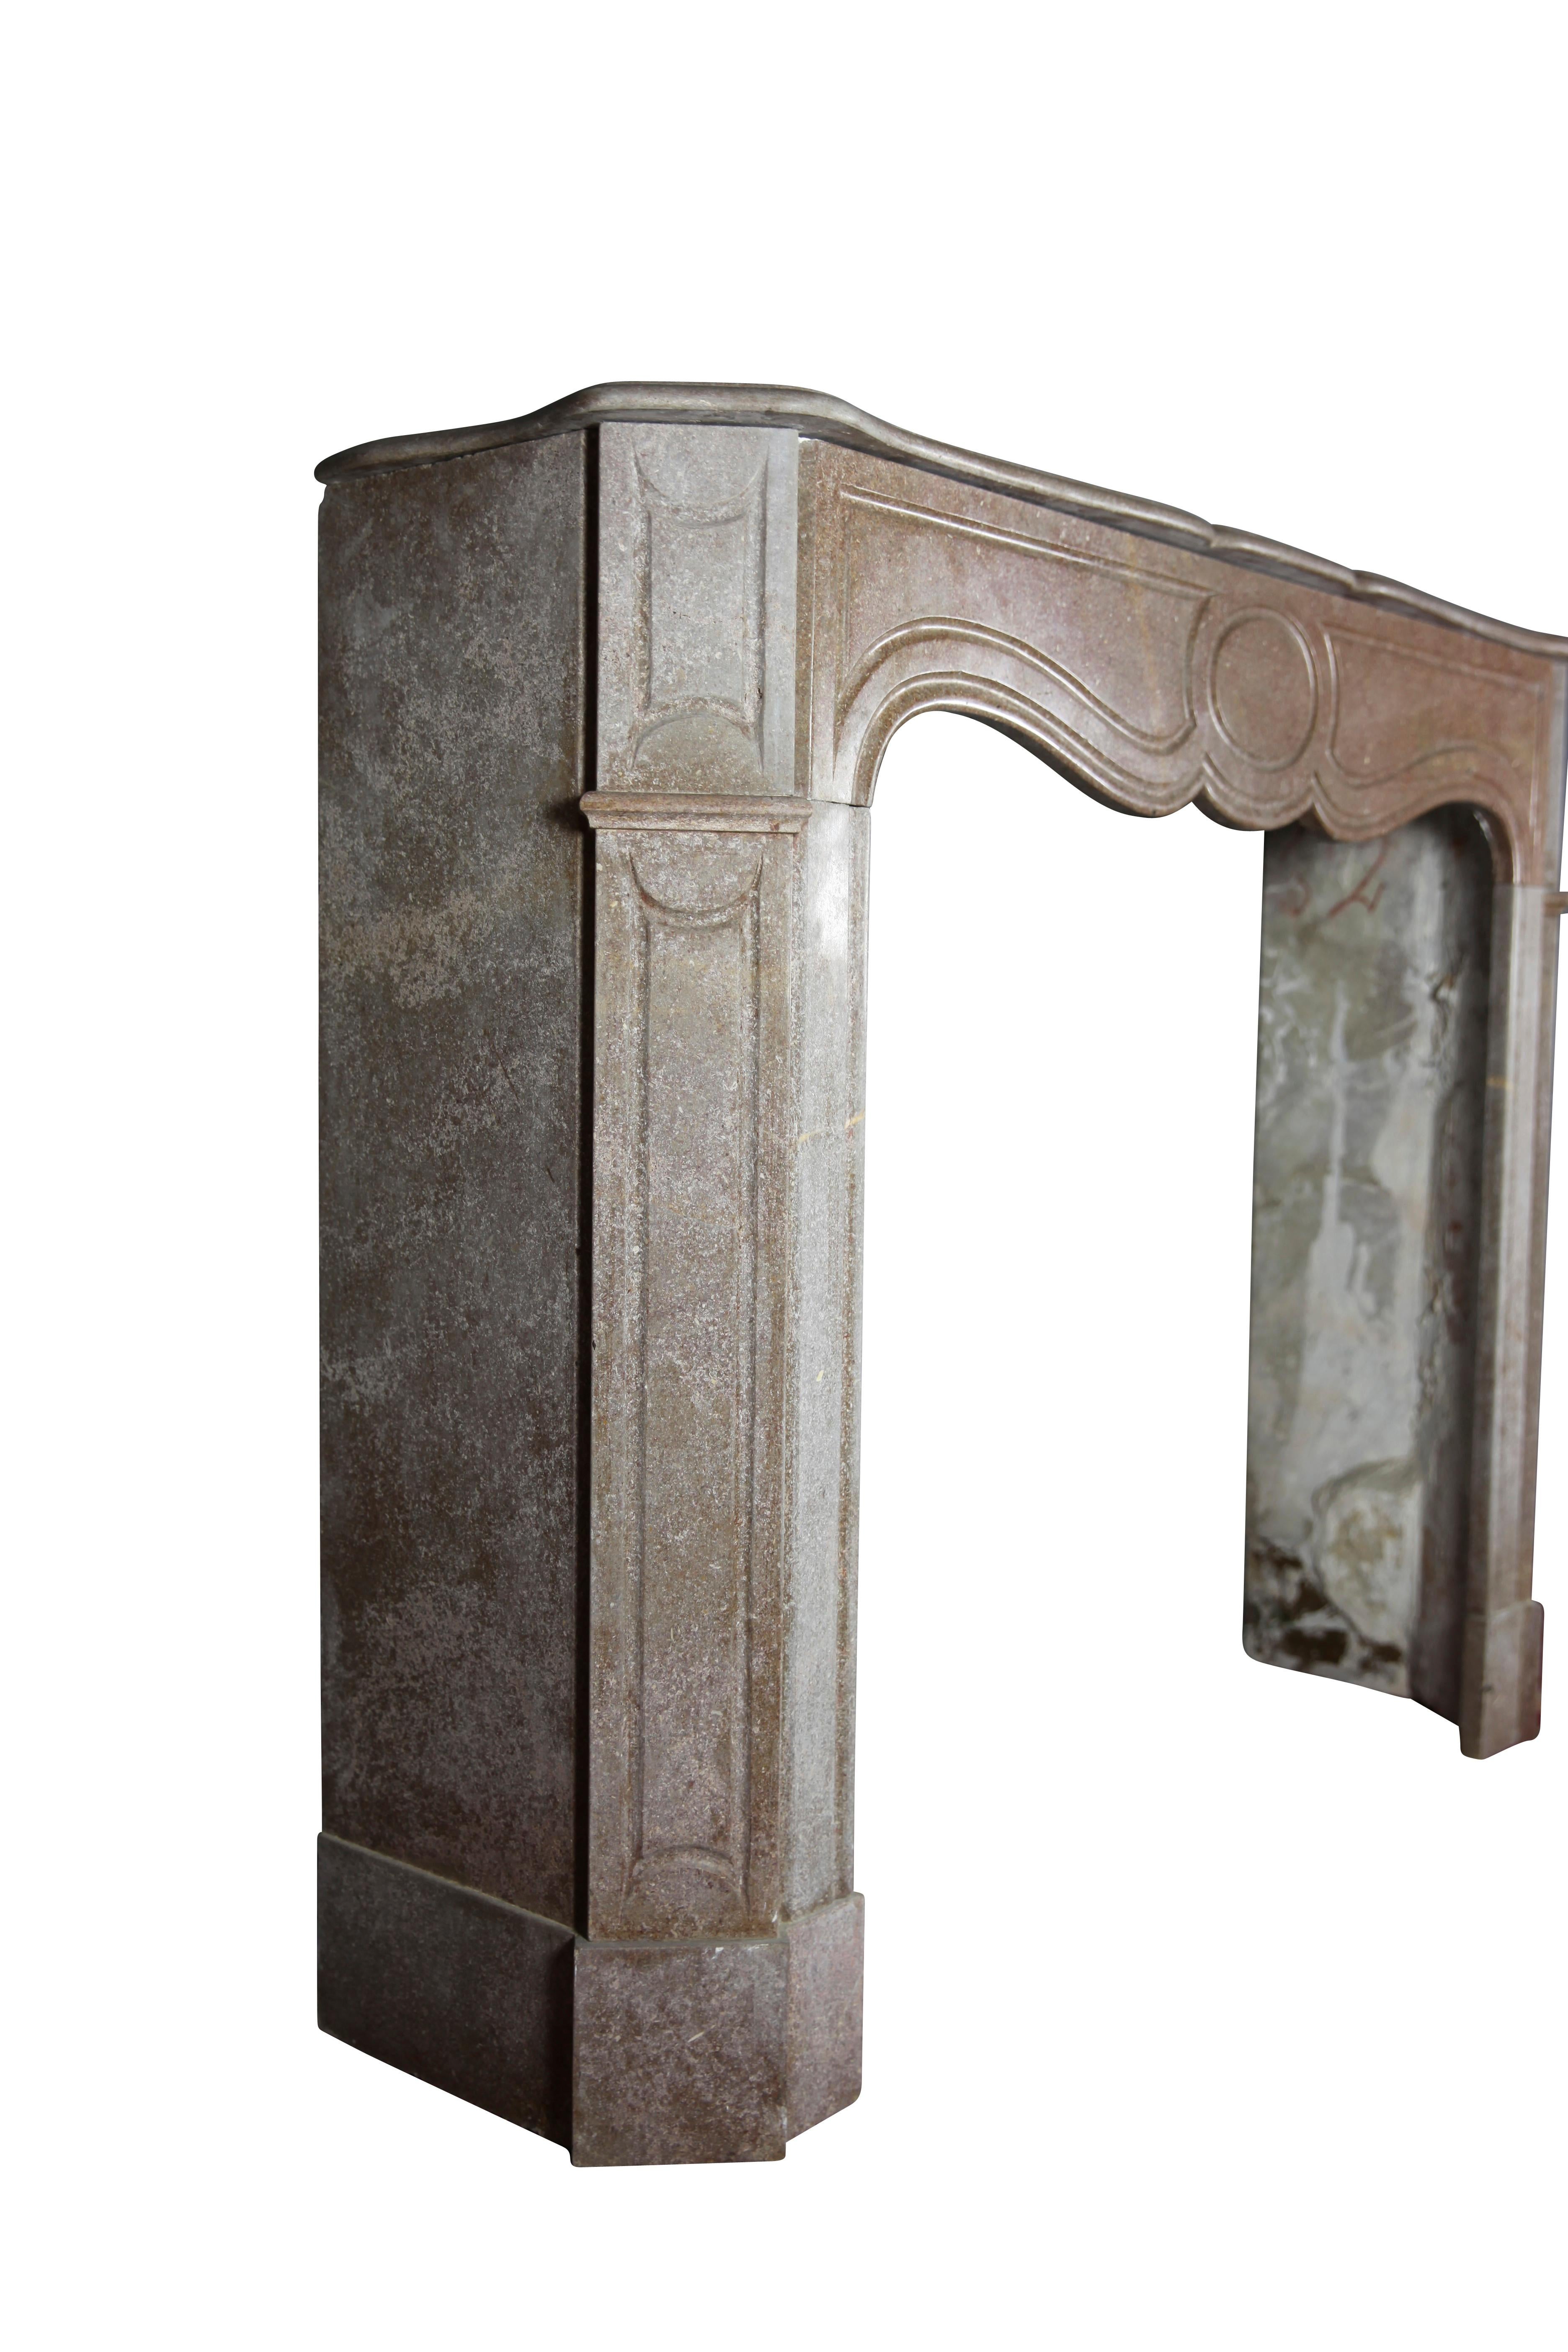 Antique fireplace surround in Buxy. The Buxy marble stone was majorly used in Monaco. It was made in the Pompadour period, 19th century. 
Measures:
125 cm exterior width 49.21 inch
101 cm exterior height 39.76 inch
90 cm interior width 35.43